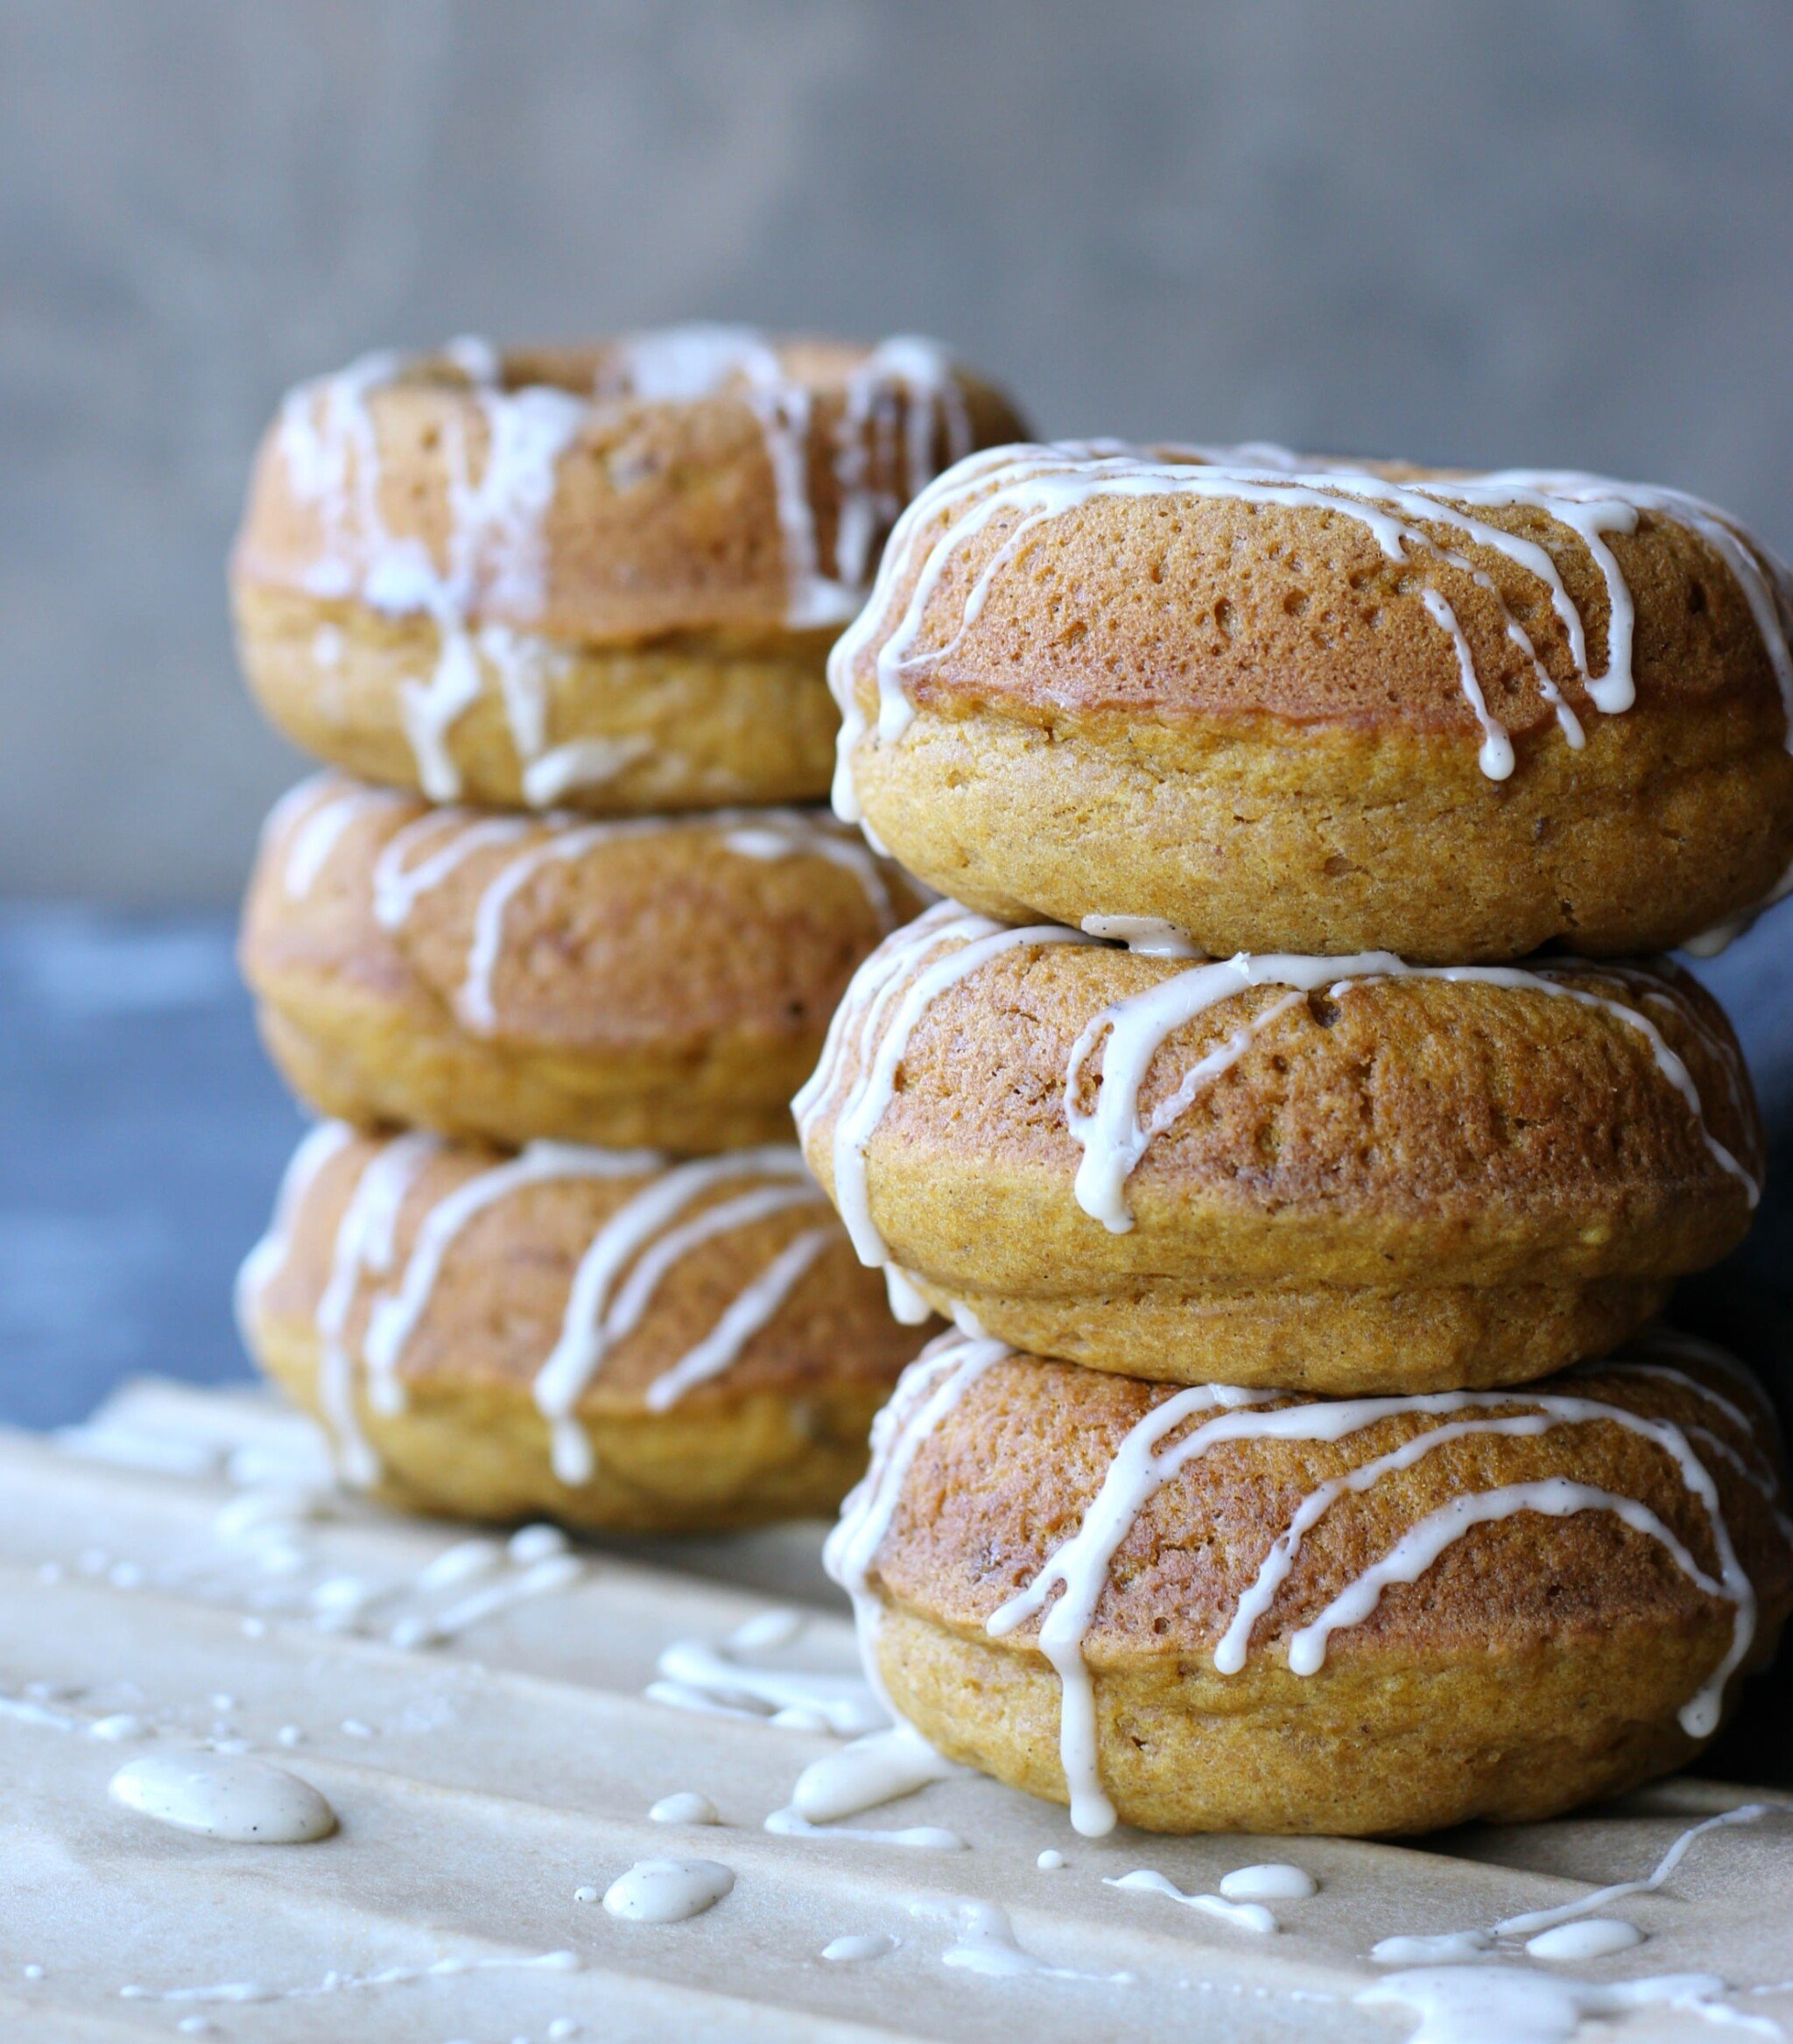 OMG These are the BEST Pumpkin Donuts on Earth! gardeninthekitchen.com